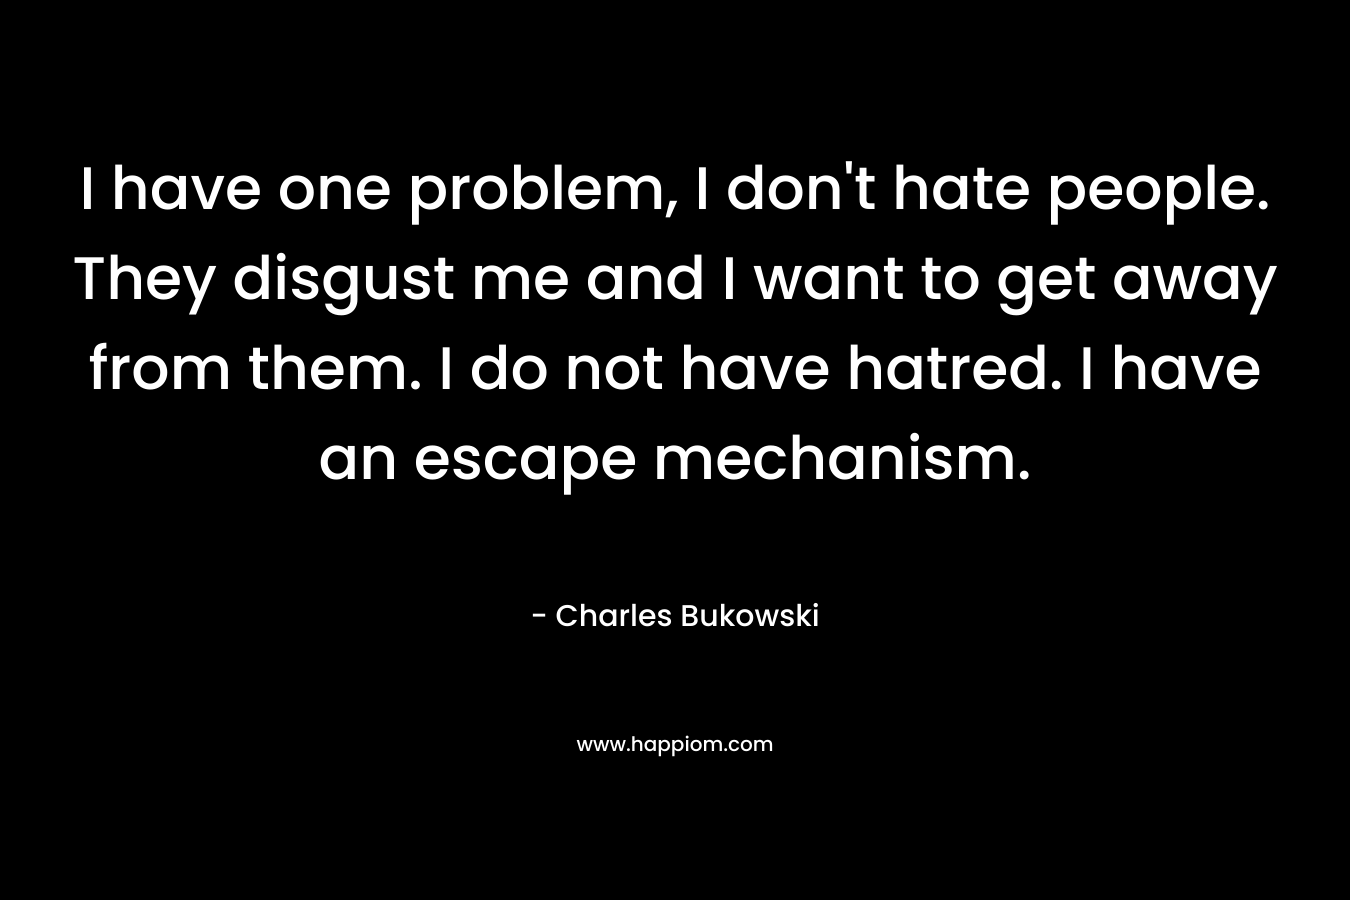 I have one problem, I don't hate people. They disgust me and I want to get away from them. I do not have hatred. I have an escape mechanism.